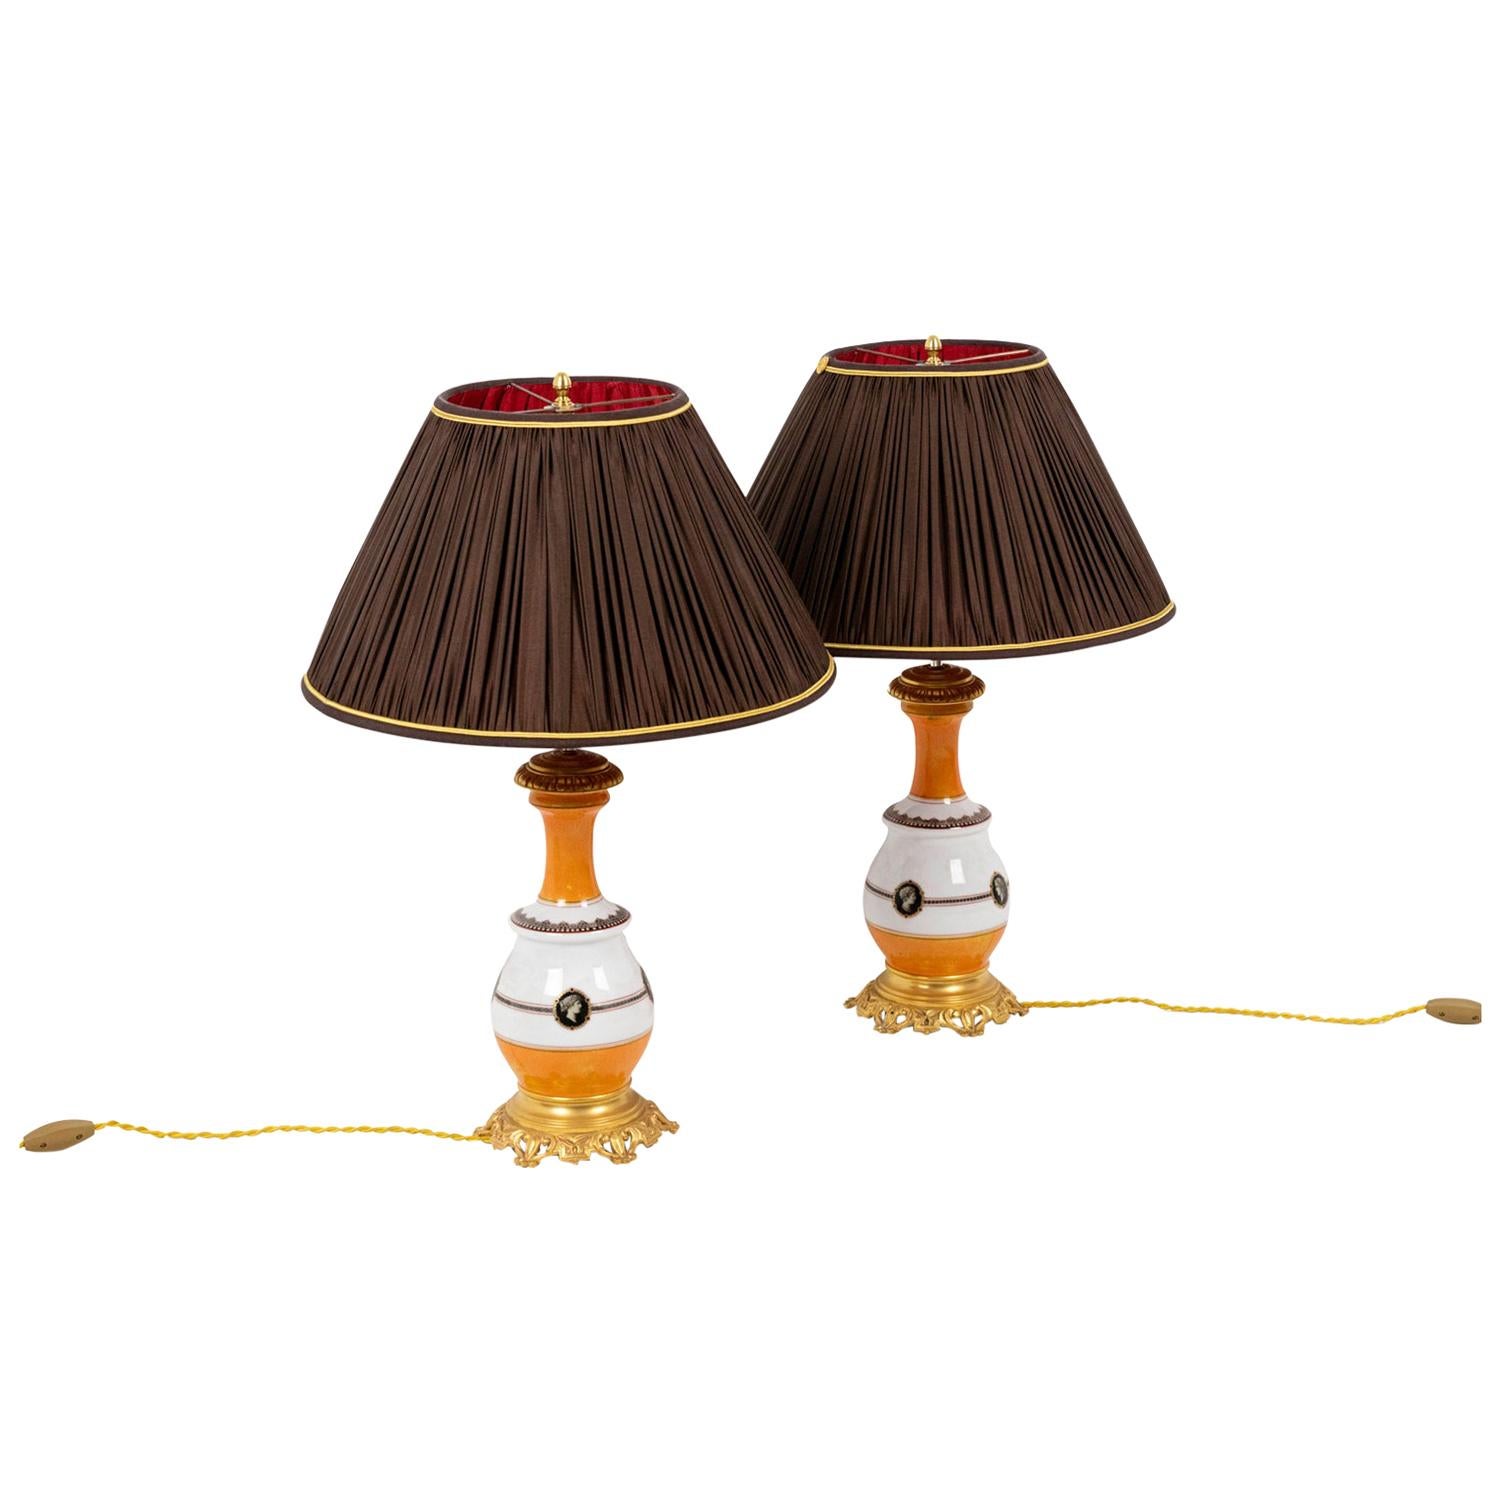 Pair of Lamps in Orange and White Porcelain, circa 1880 For Sale